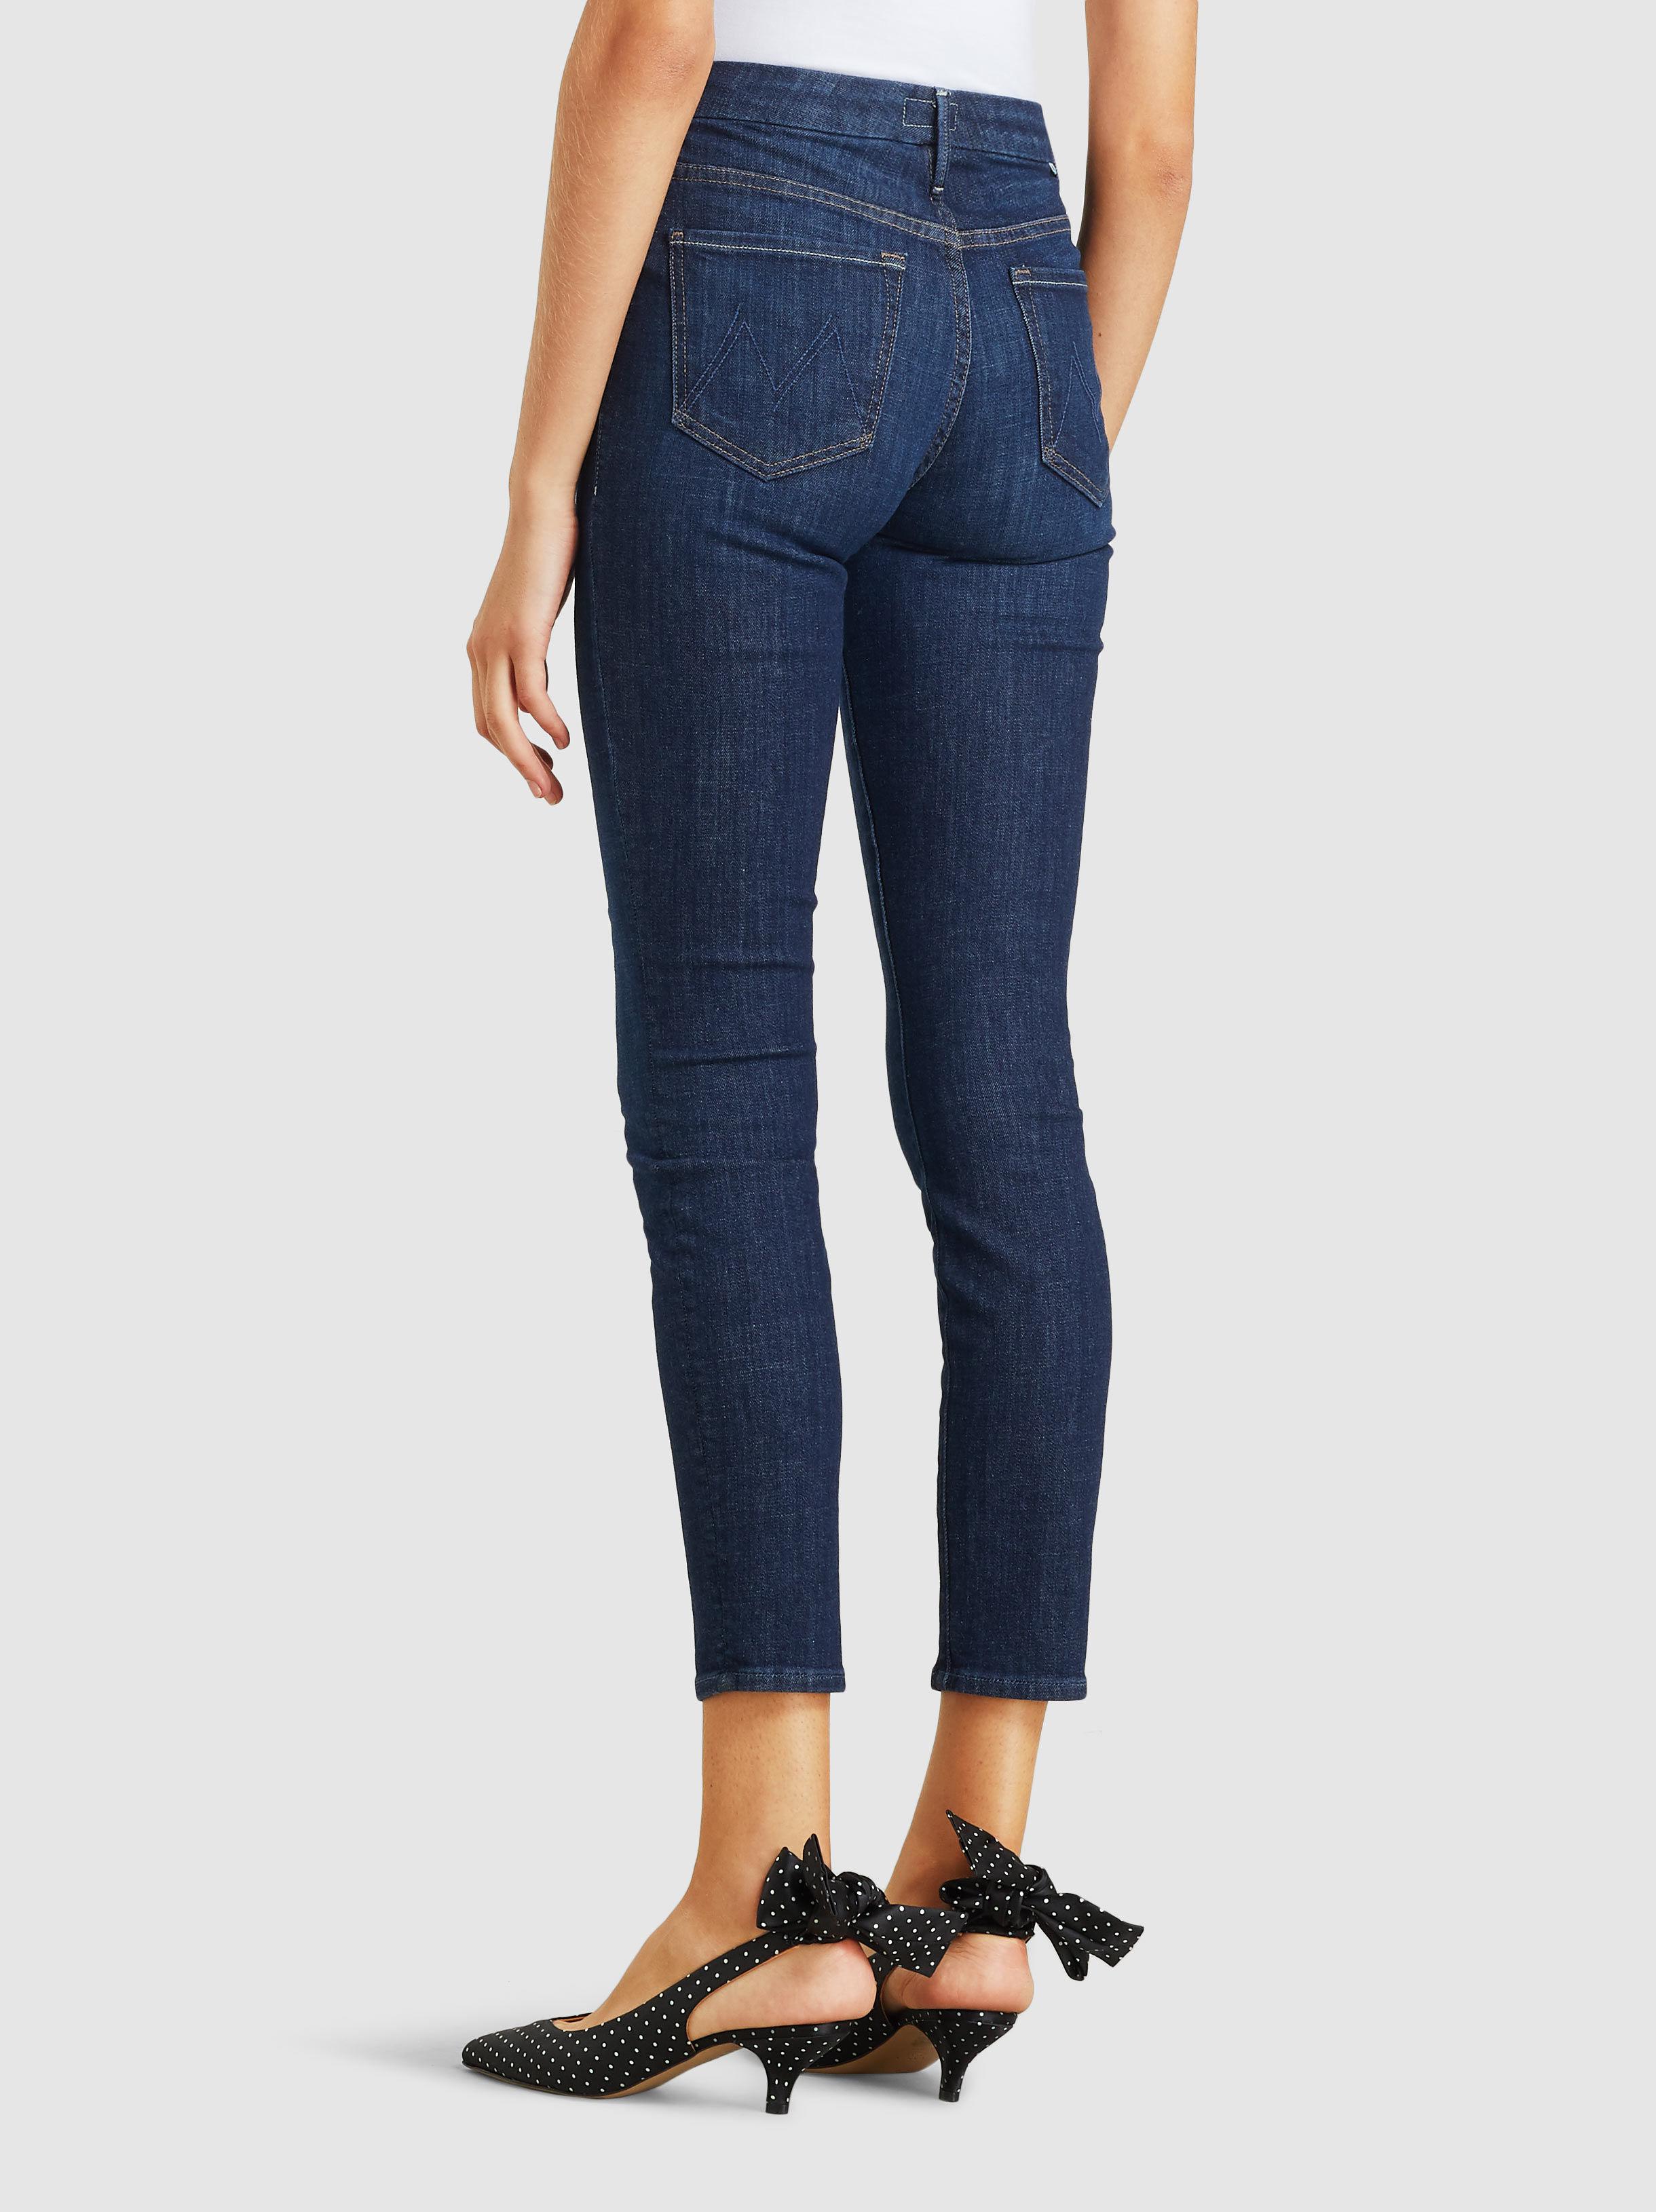 Mother Denim The Looker High-waisted Skinny Jeans in Navy (Blue) - Lyst